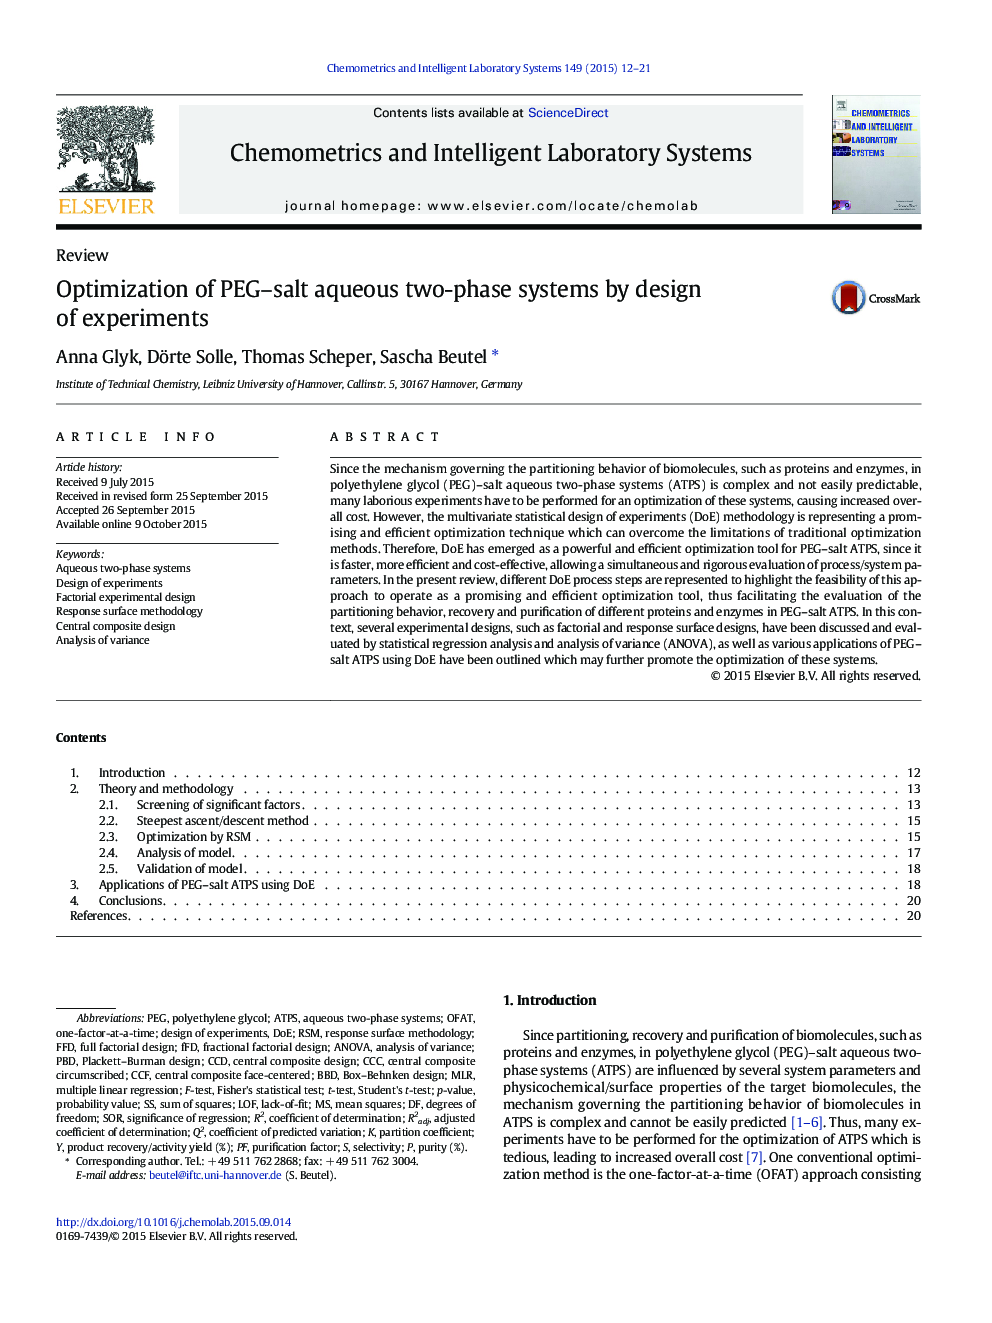 Optimization of PEG–salt aqueous two-phase systems by design of experiments